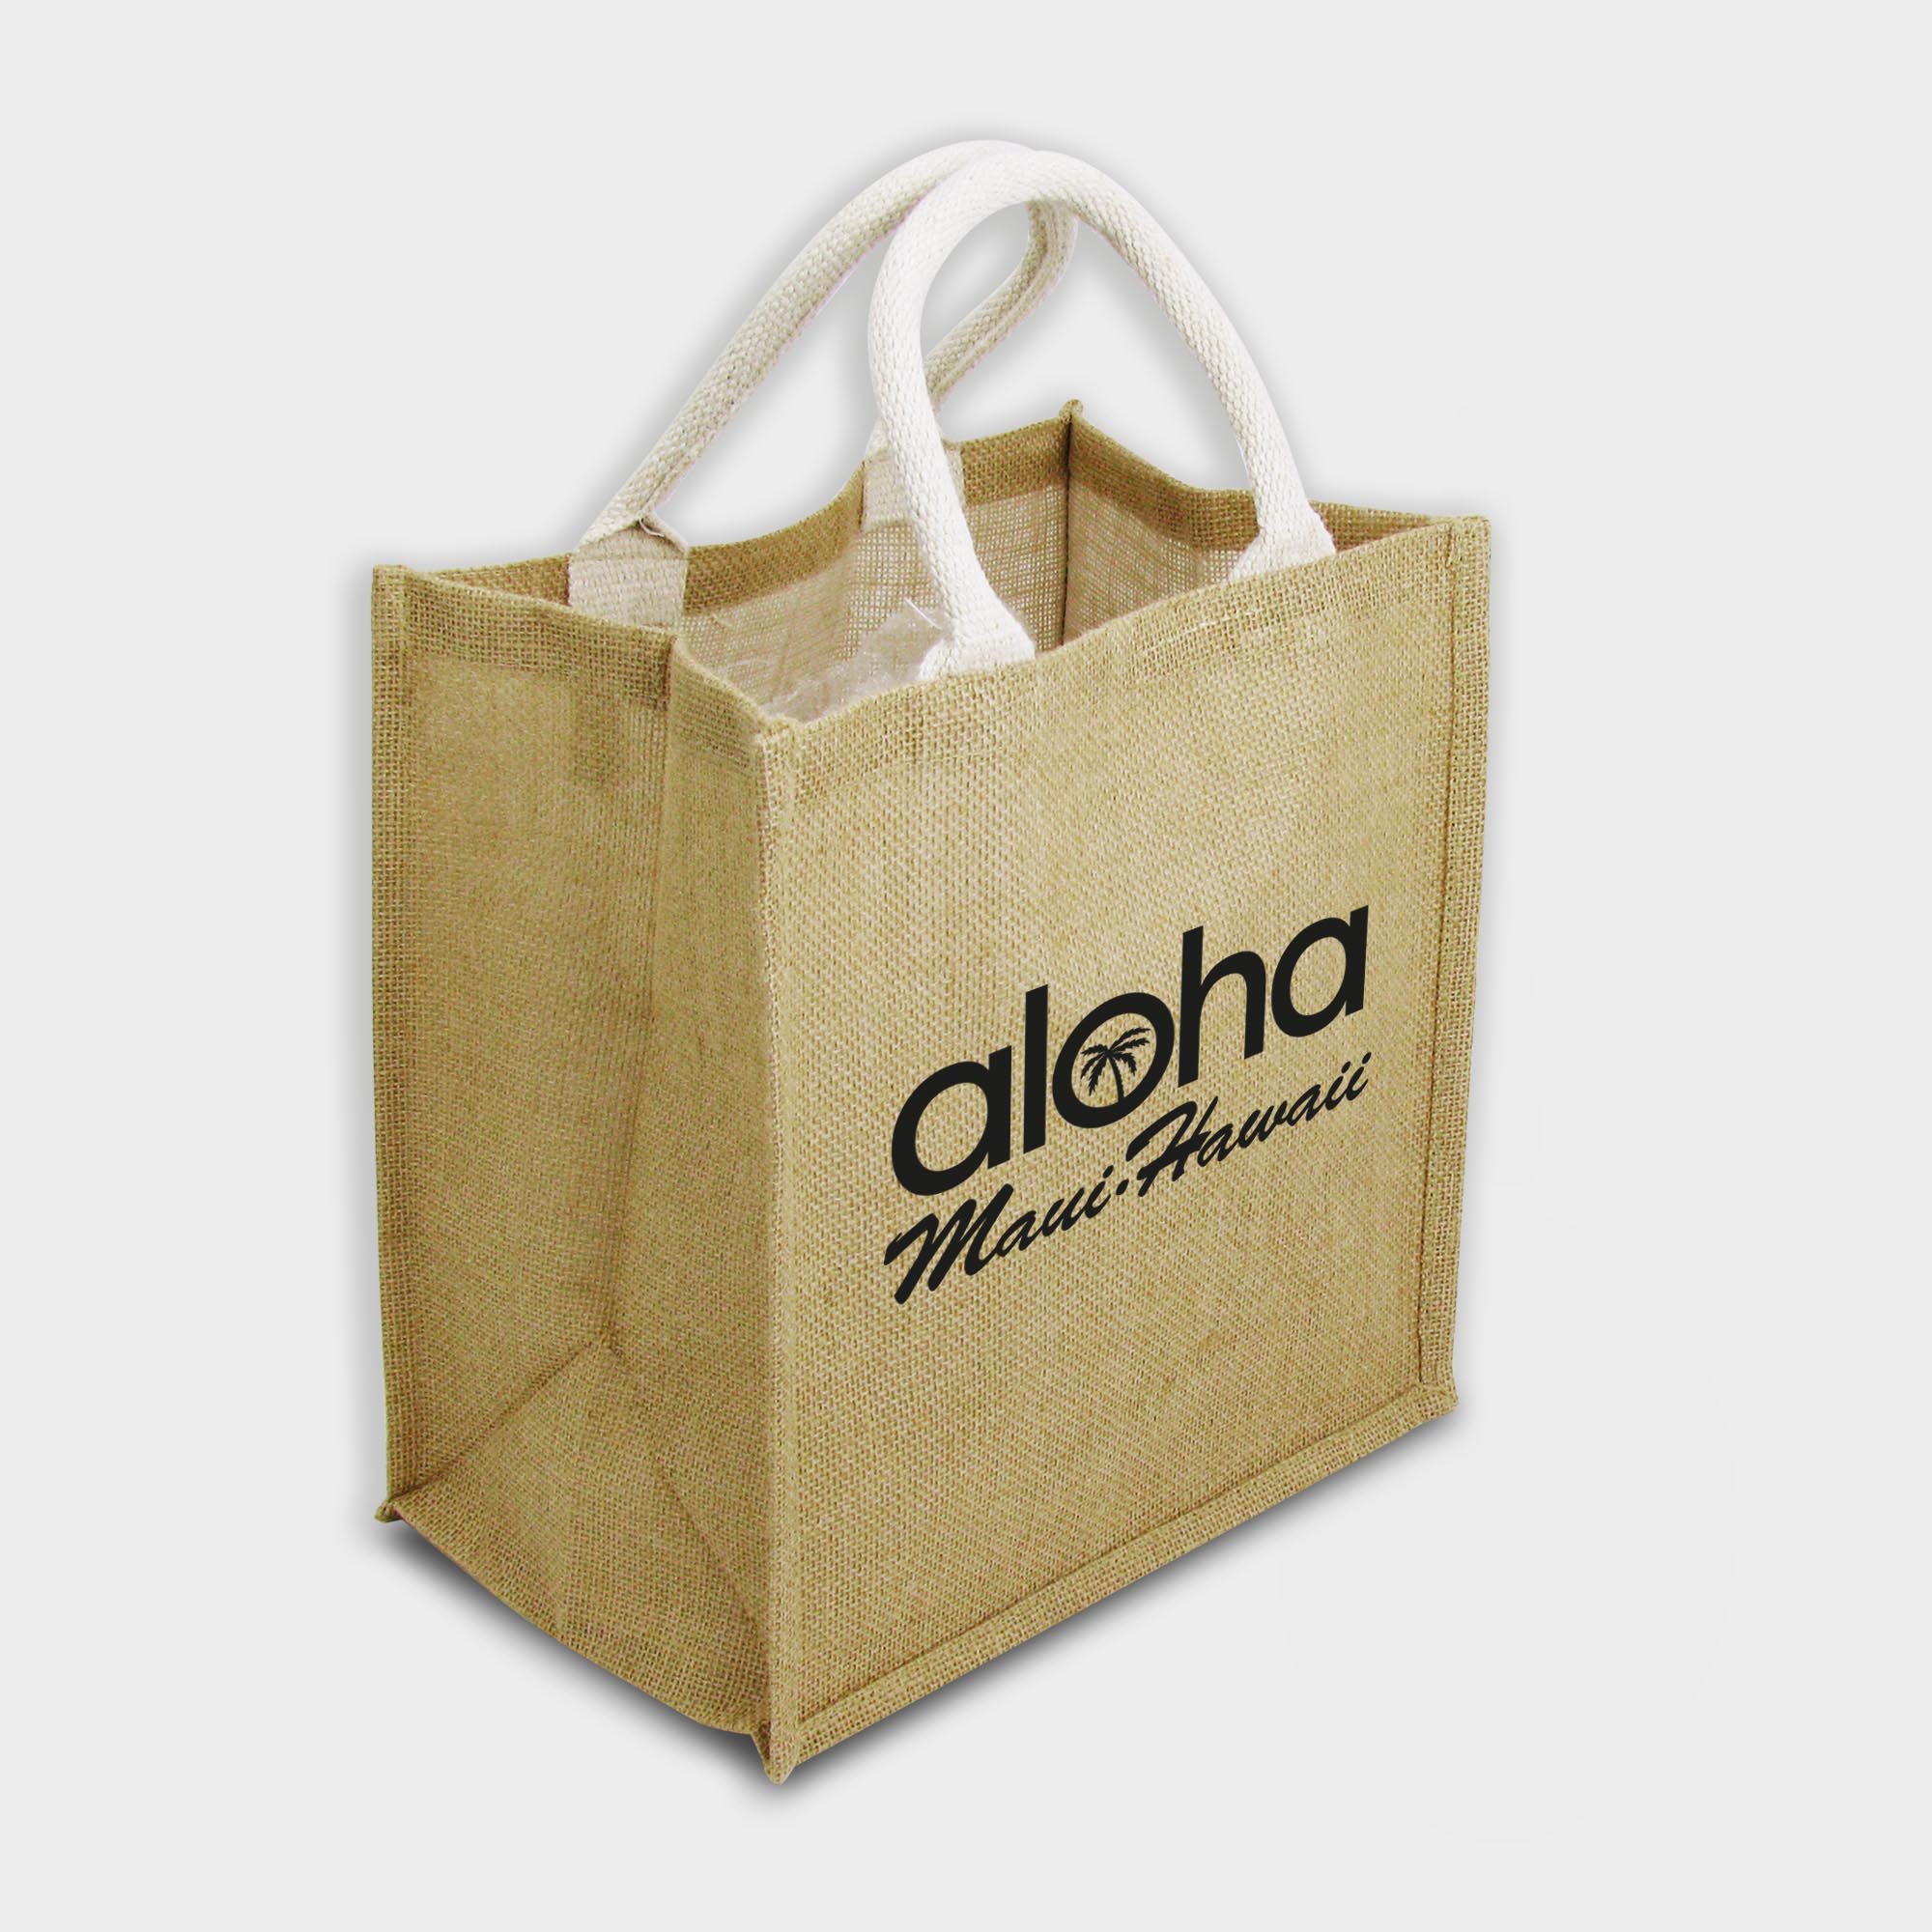 The Green & Good Brighton Jute Bag is made from natural and sustainable jute. Popular shopping and gift bag with square format and cotton webbing over rope handles. Lined inside with a laminated surface for easy cleaning and sturdiness.